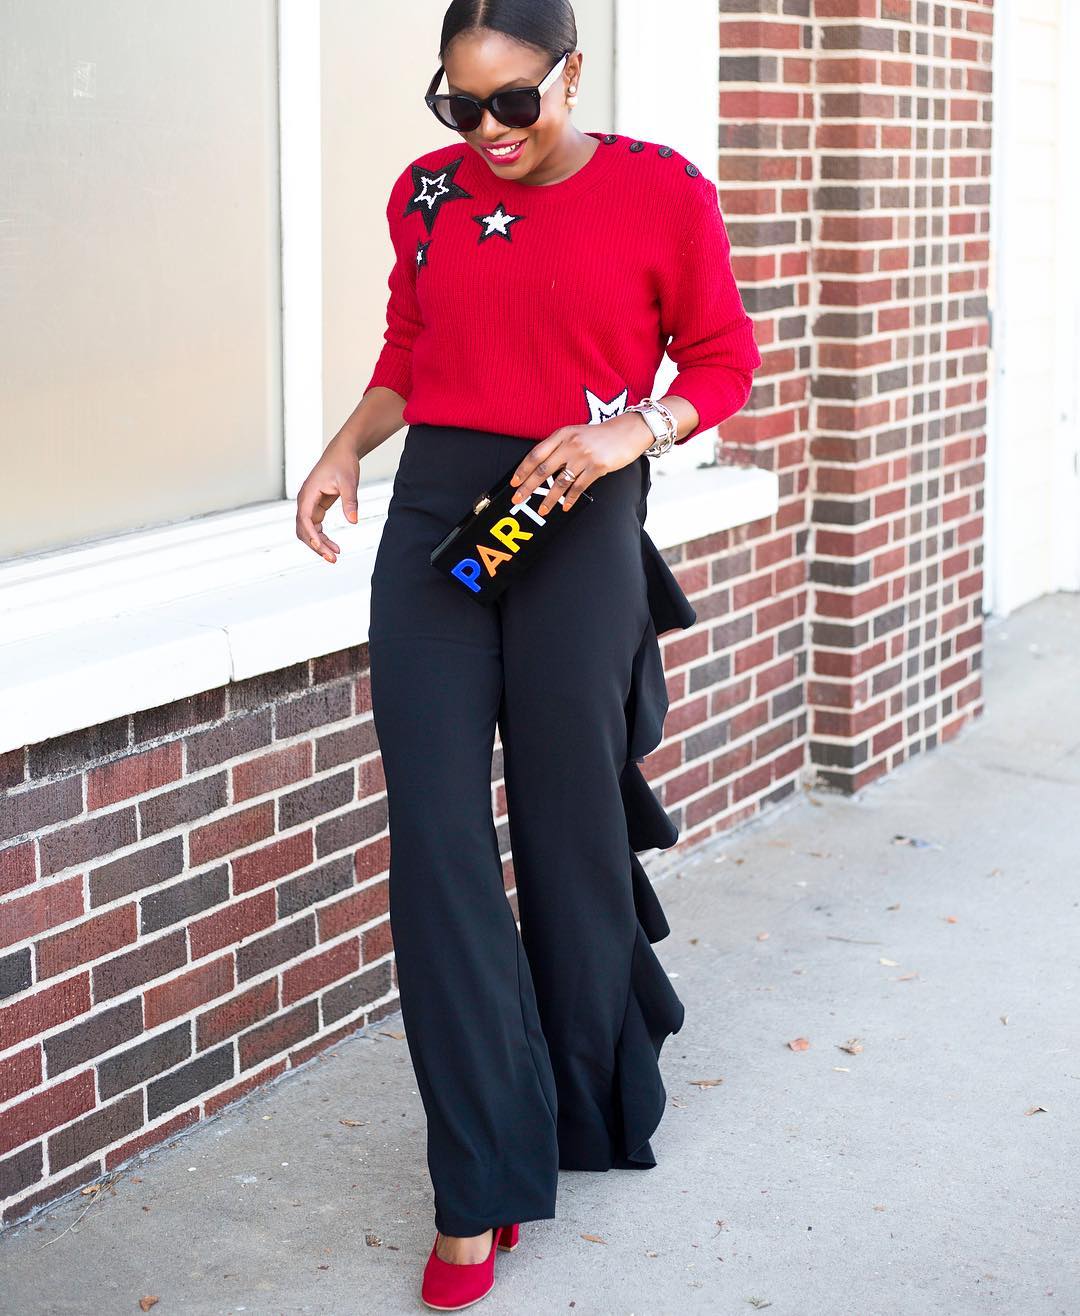 how-to-wear-red-for-festive-holiday-holiday-fashionpolicenigeria-3